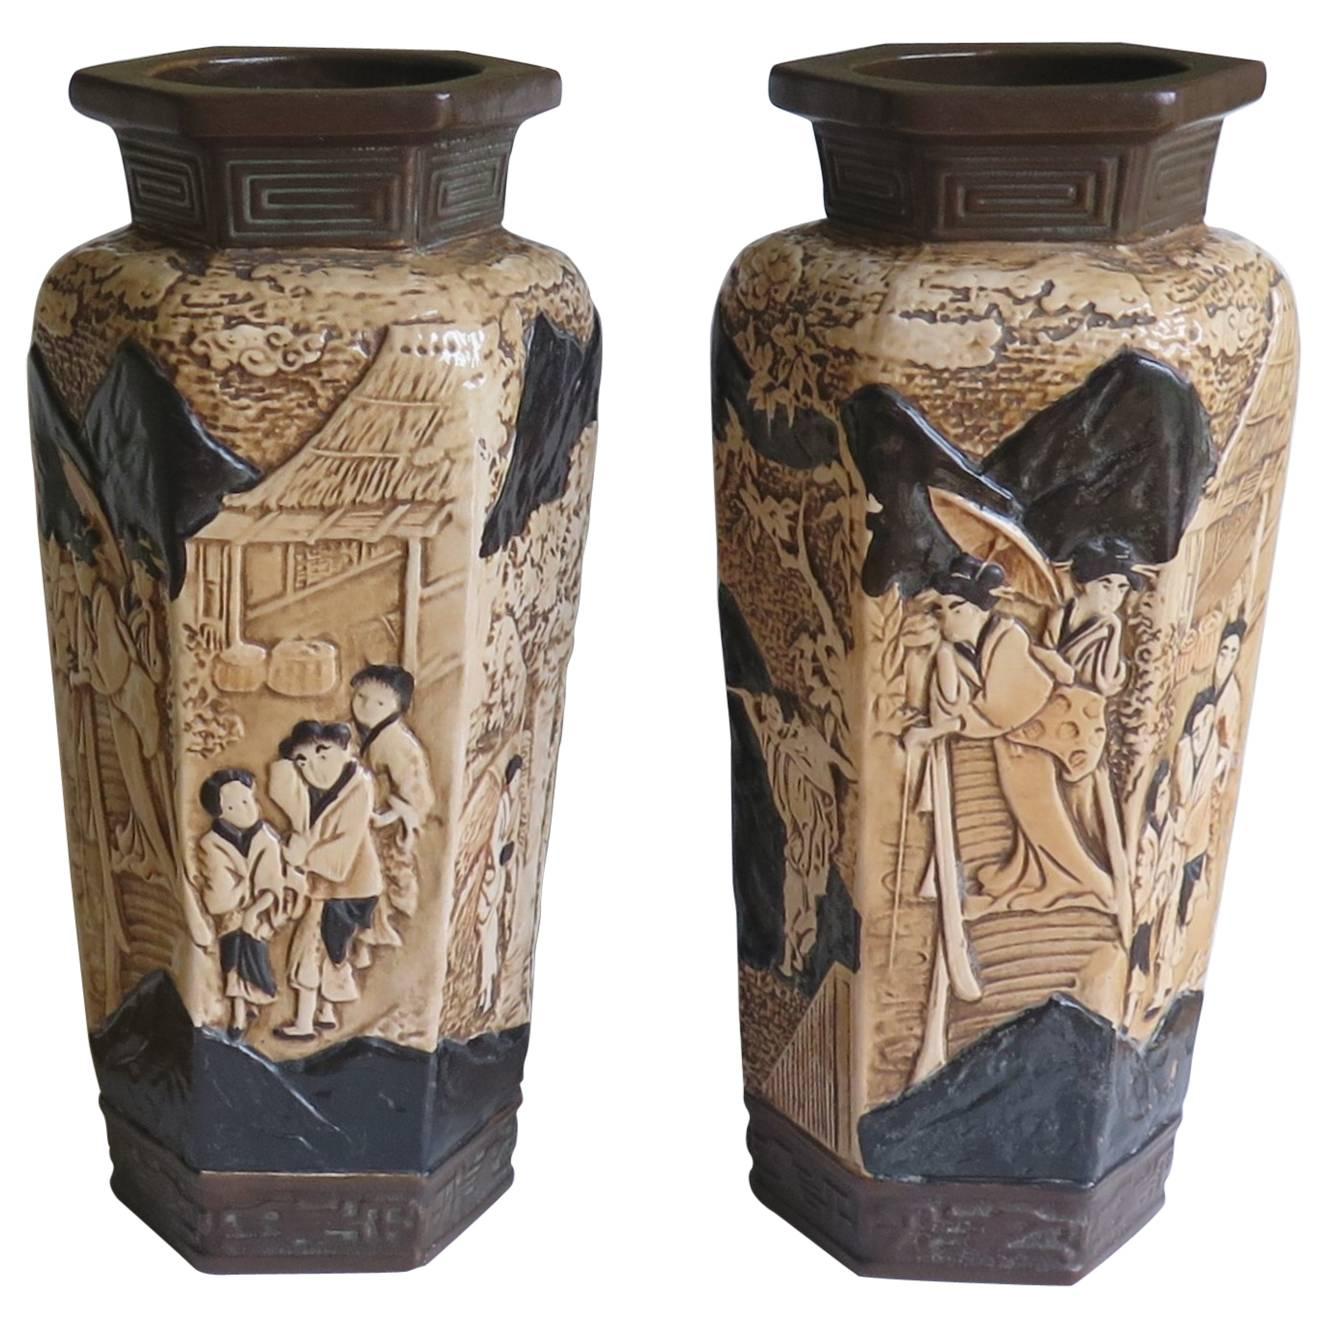 PAIR of Large Pottery 15 Inch Vases by Bretby Ceramics, English Circa 1914